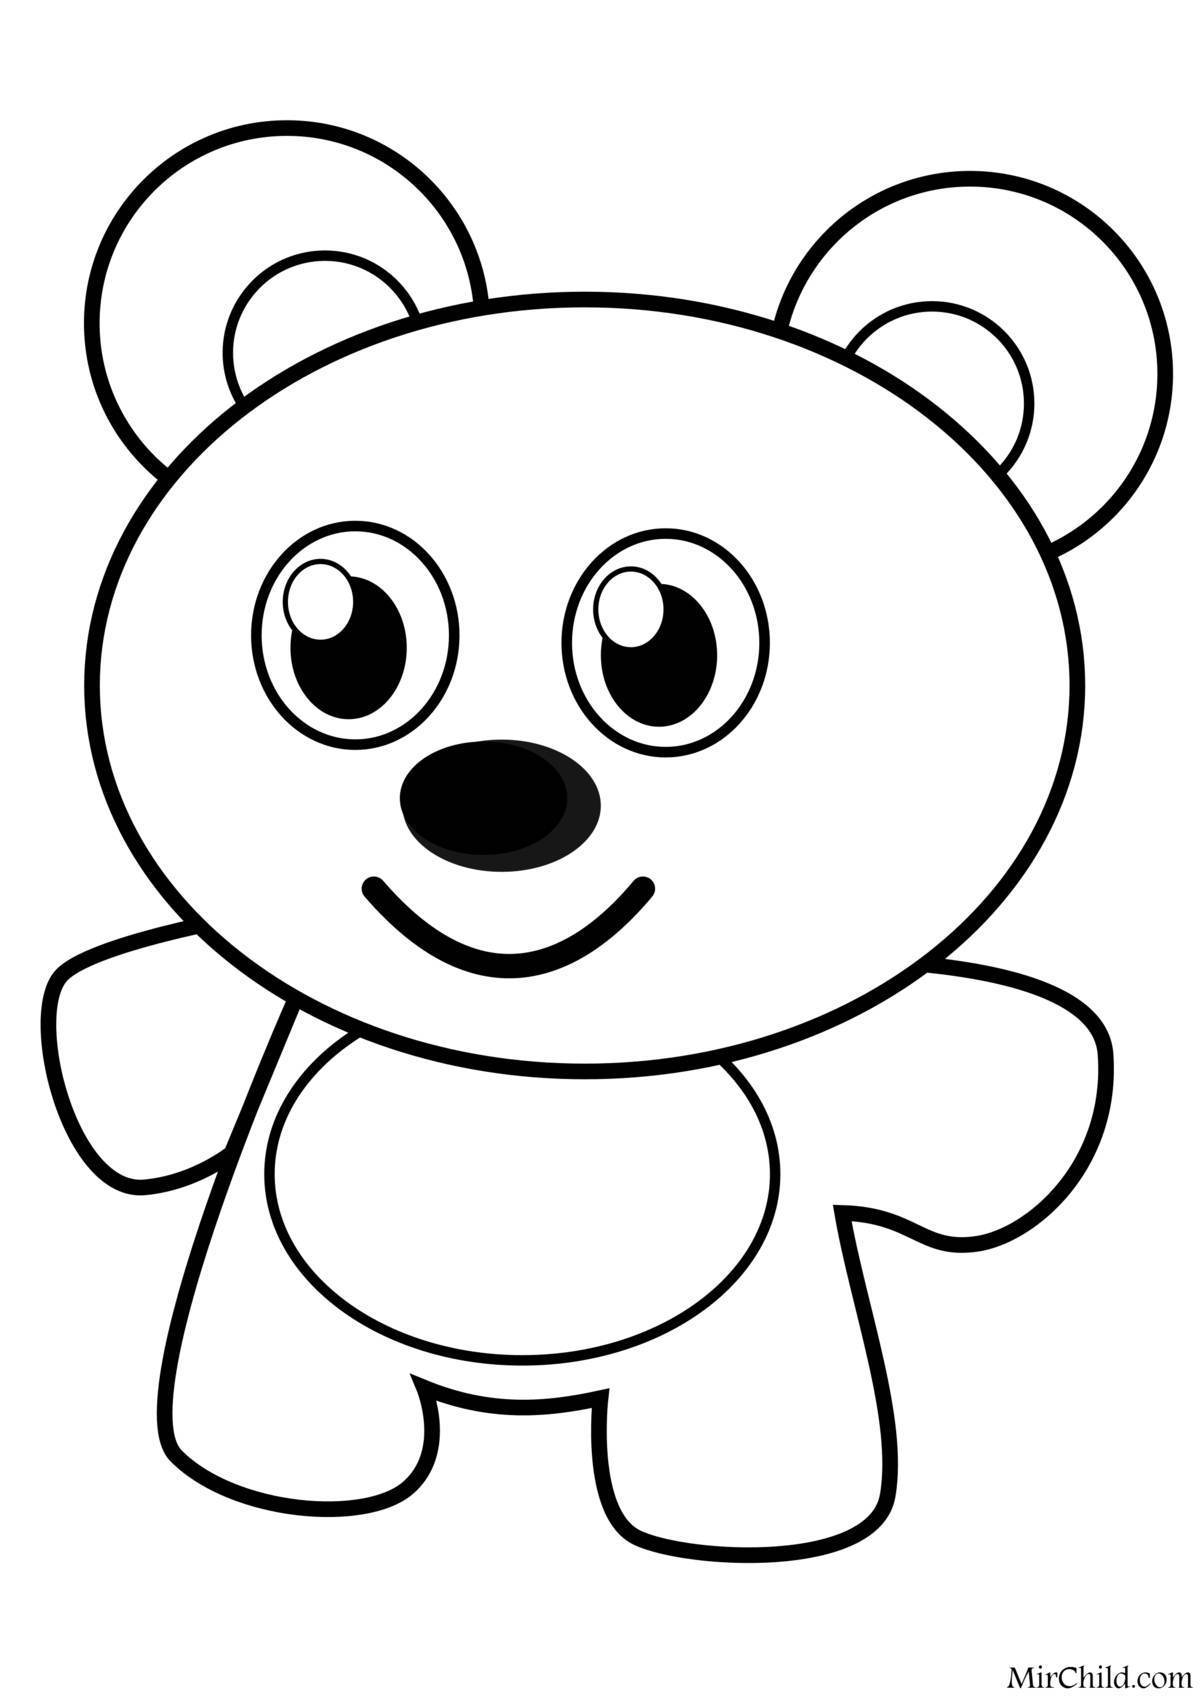 Cute coloring picture for kids